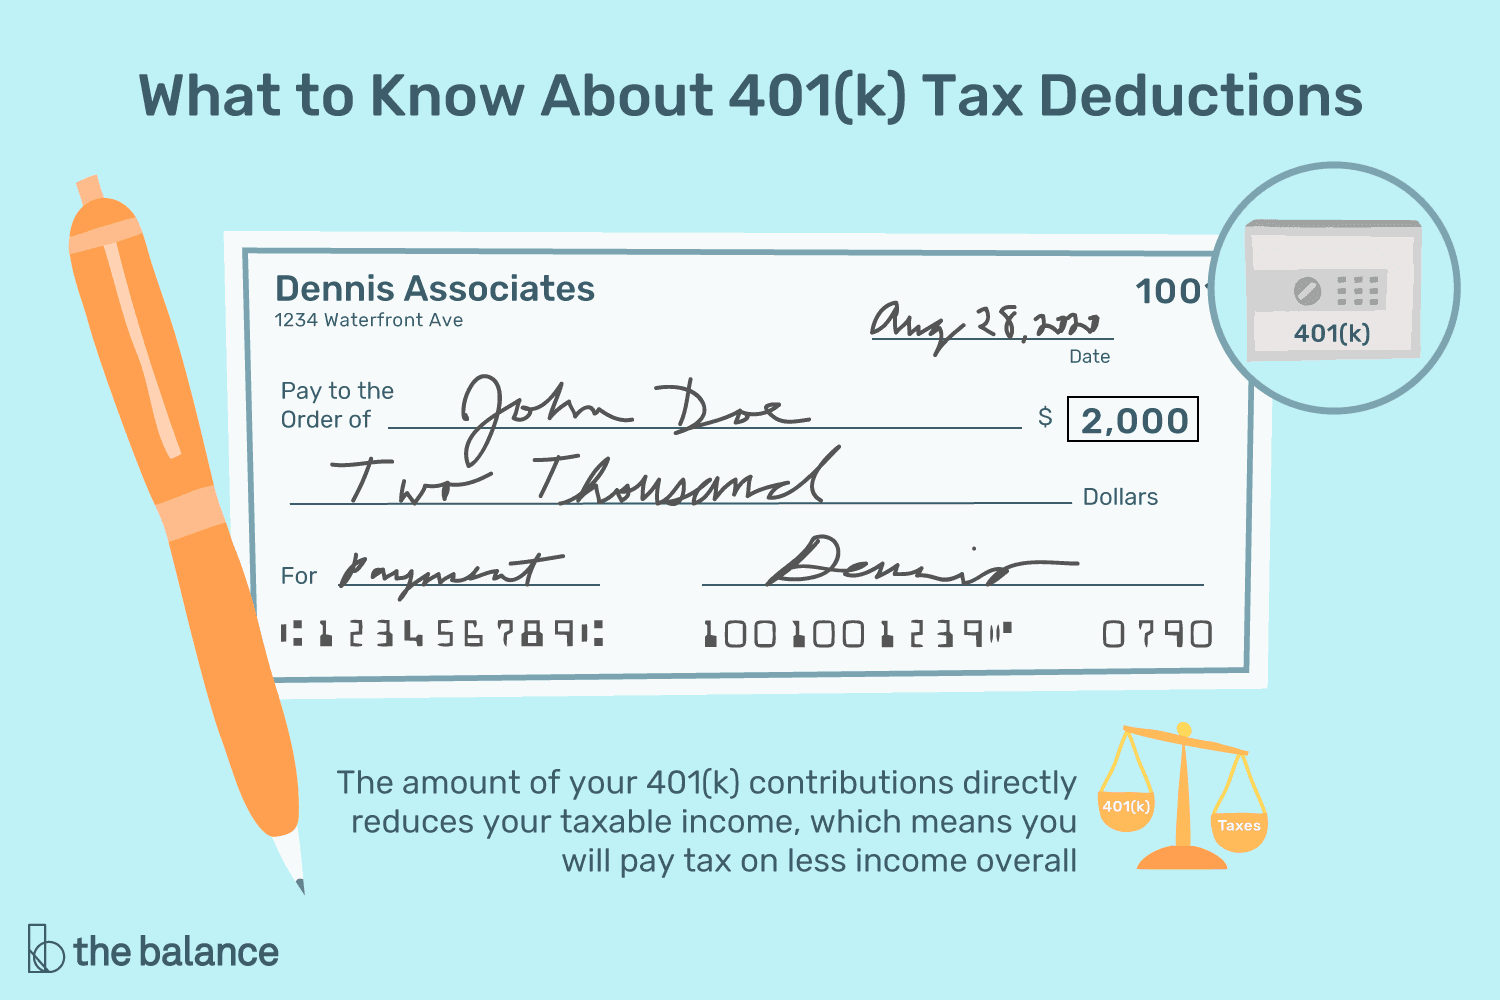 How Do 401(k) Tax Deductions Work?